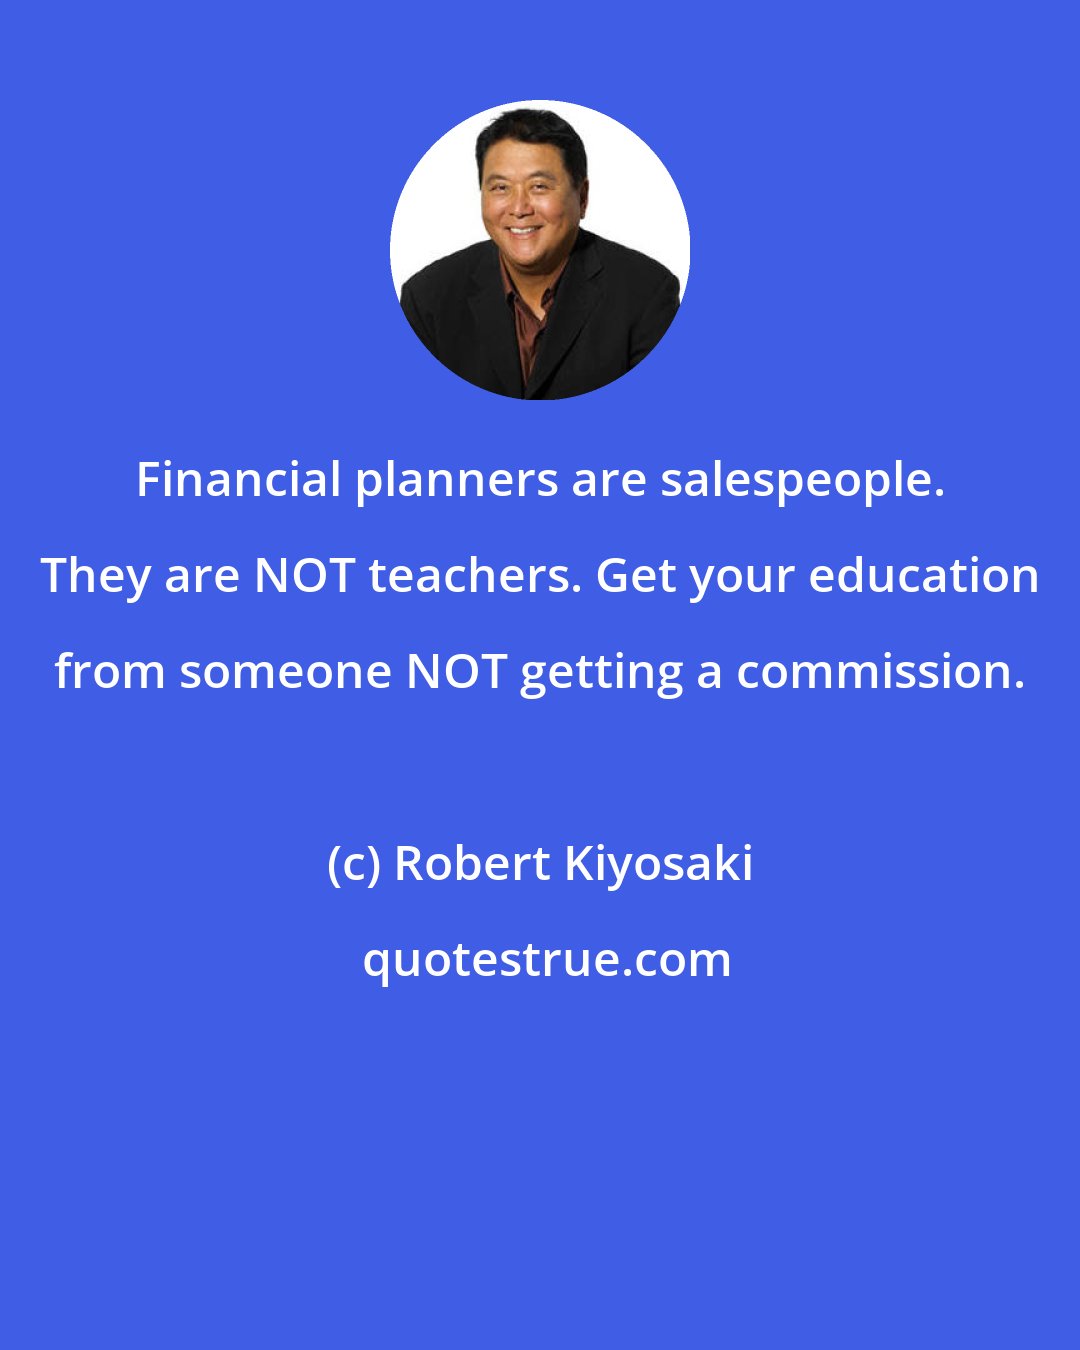 Robert Kiyosaki: Financial planners are salespeople. They are NOT teachers. Get your education from someone NOT getting a commission.